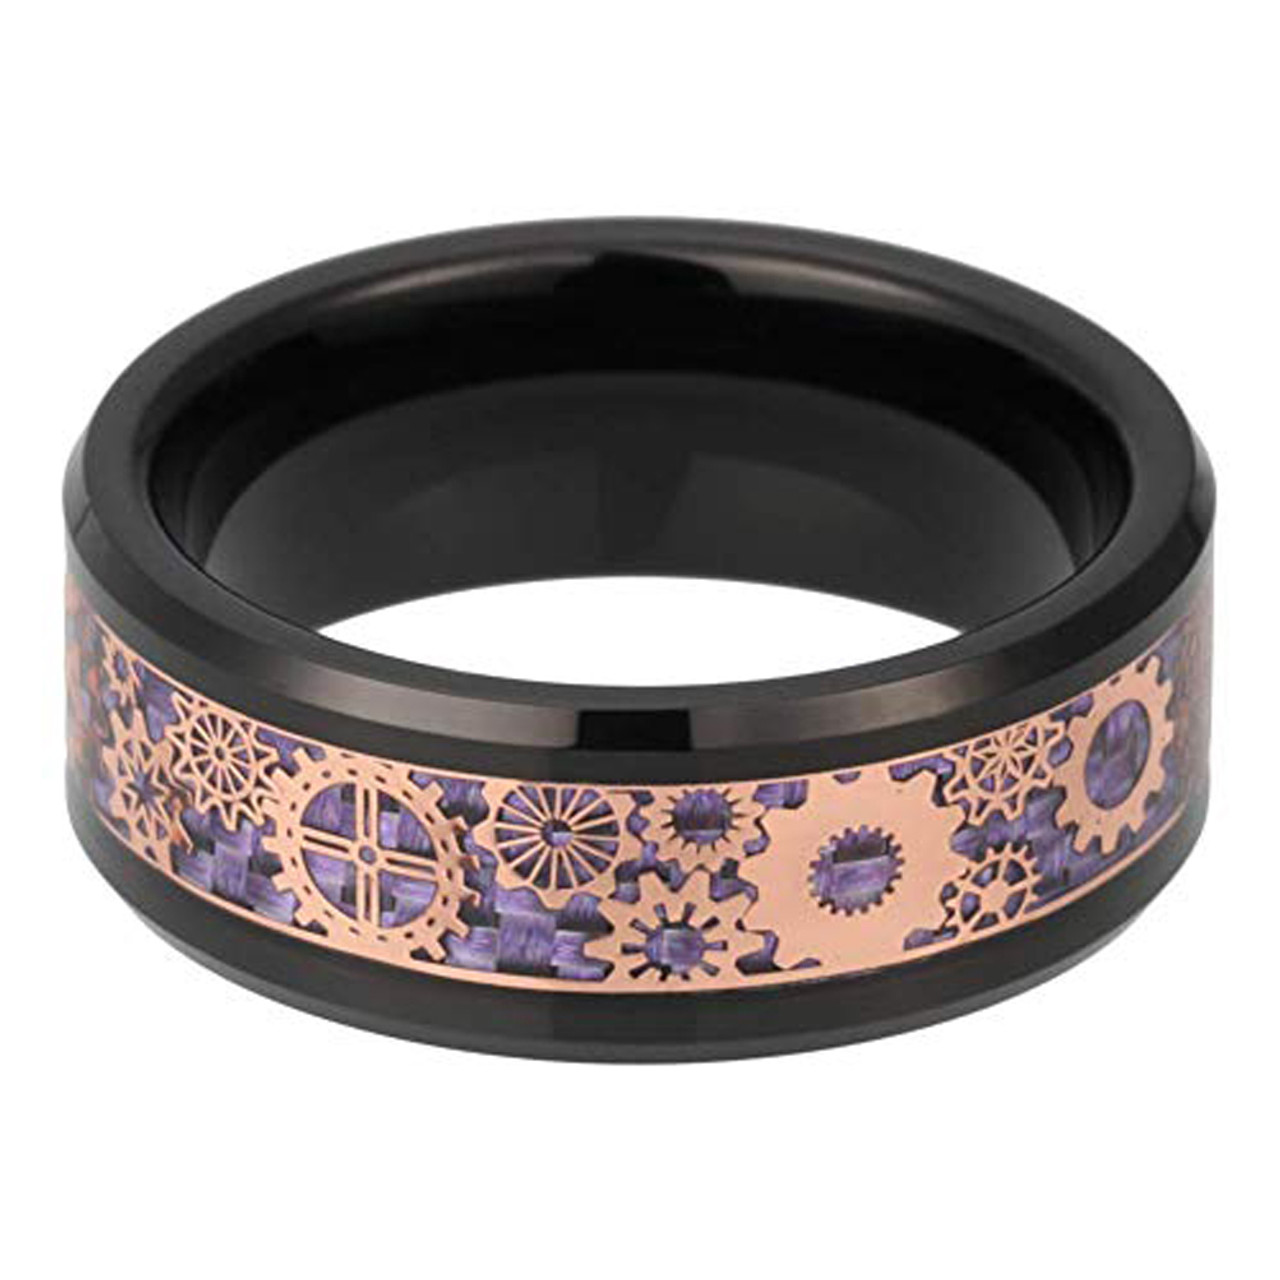 (8mm) Unisex or Men's Tungsten Carbide Wedding ring band. Wedding ring band Violet Purple Carbon Fiber Inlay Black Band with Rose Gold Mechanical Gears. Tungsten Carbide Ring